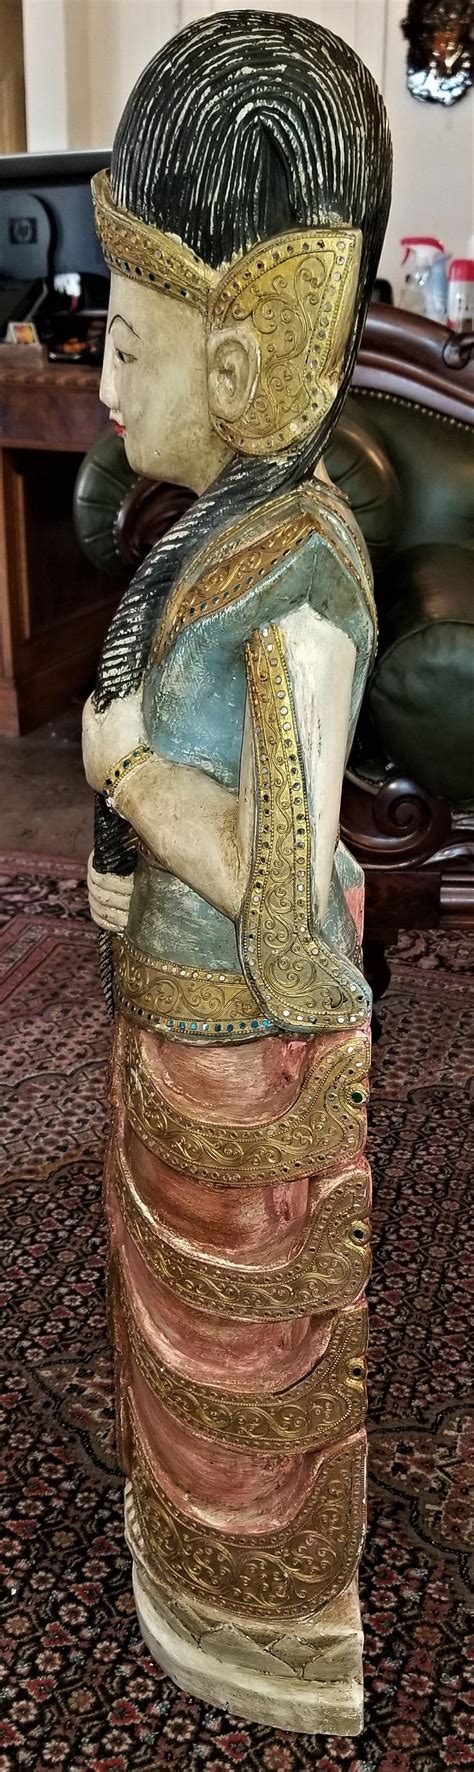 Early 20th Century Thai Goddess Polychrome Statue For Sale At 1stdibs